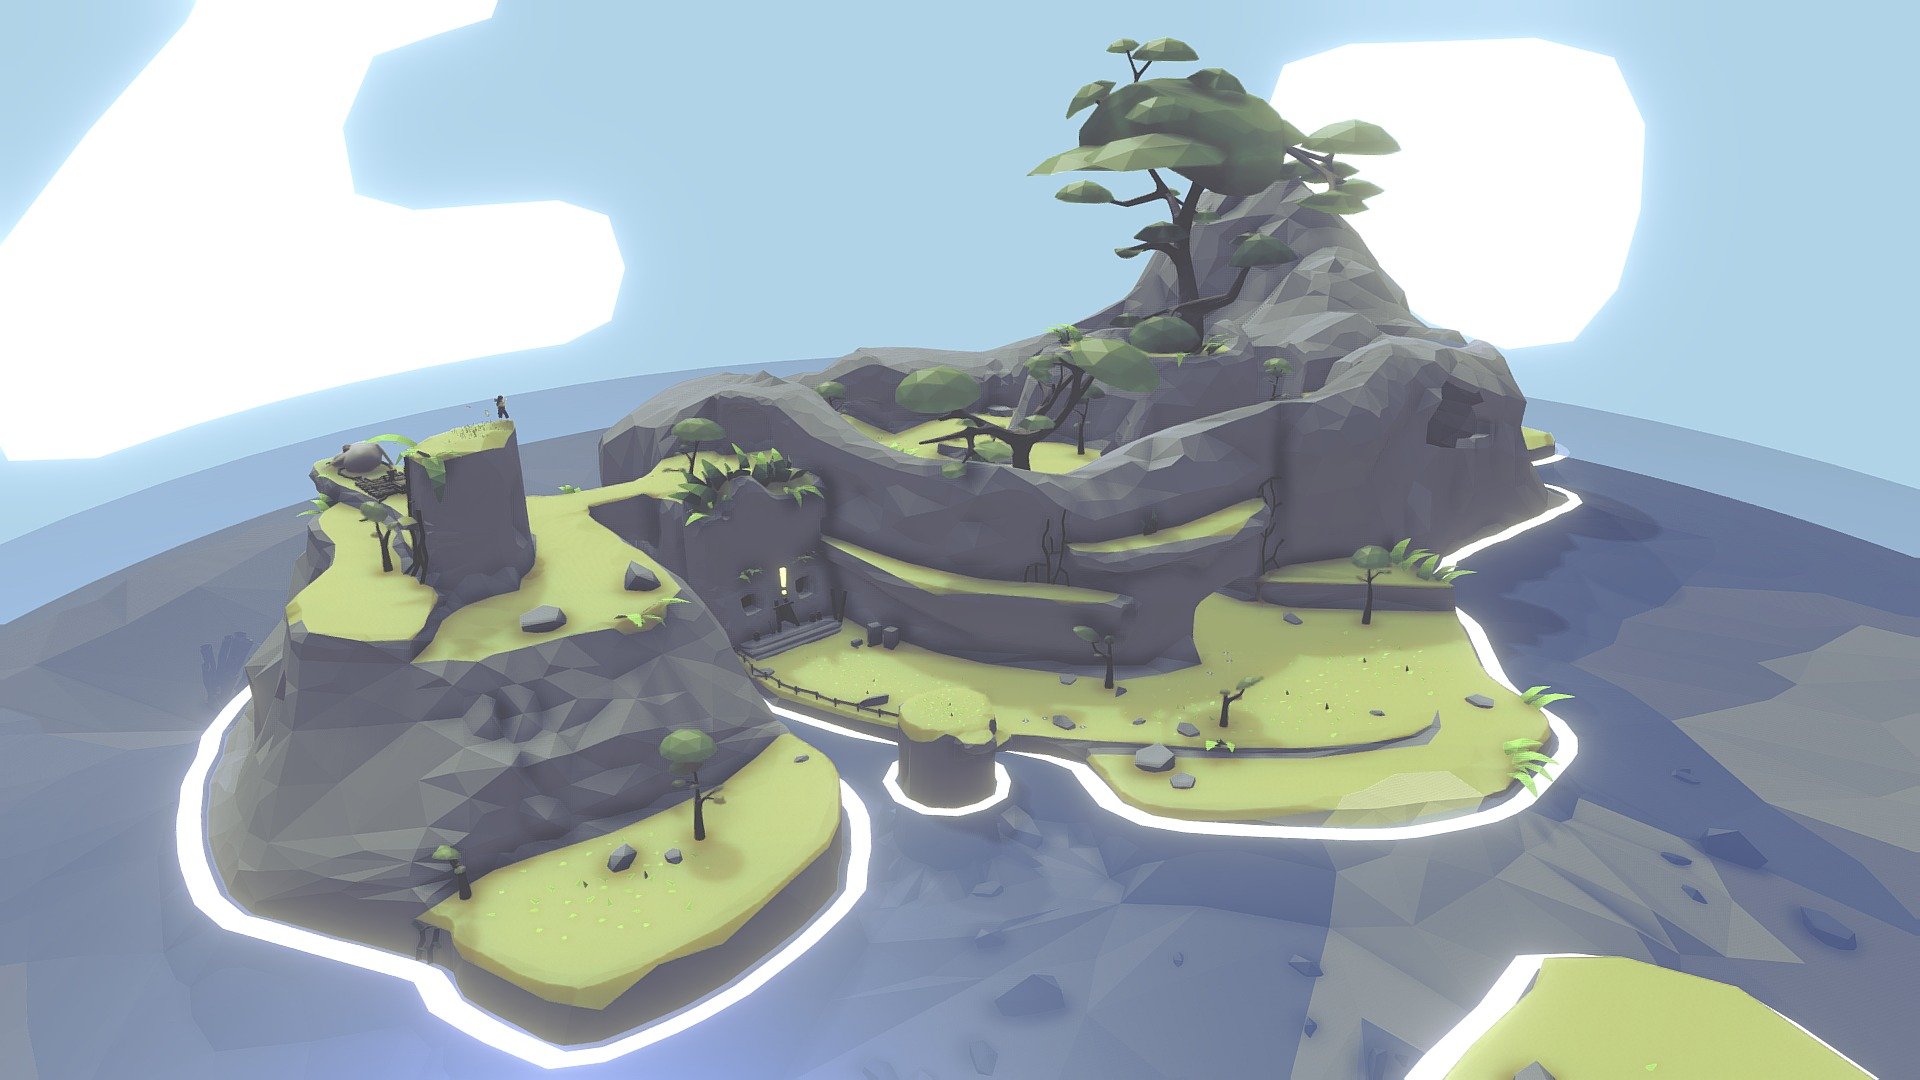 My entry to sketchfab January 2020 challenge. (Lowpoly game level).

Wicca, The mining master of Whereabouts has some kind of problem that is related to old forest 3d model